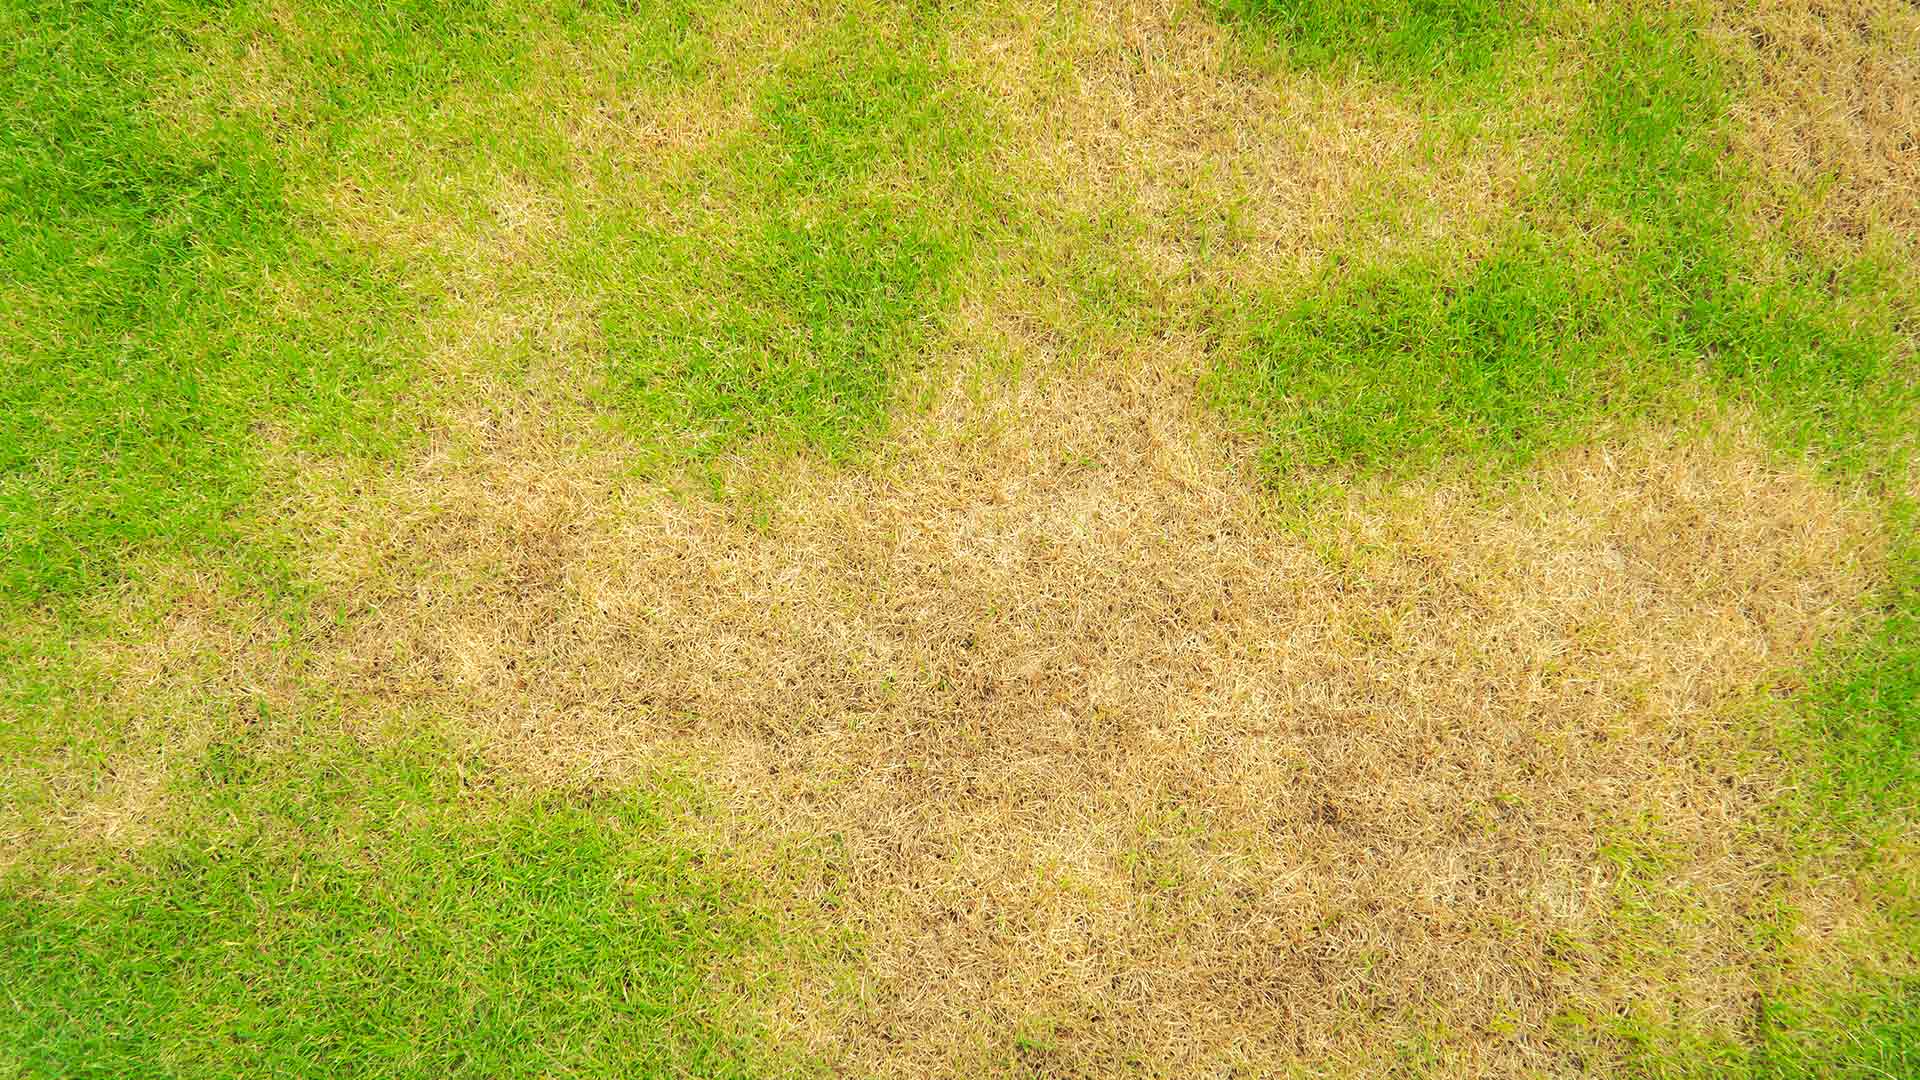 Has Summer Patch Infected Your Lawn? Here’s What to Do!